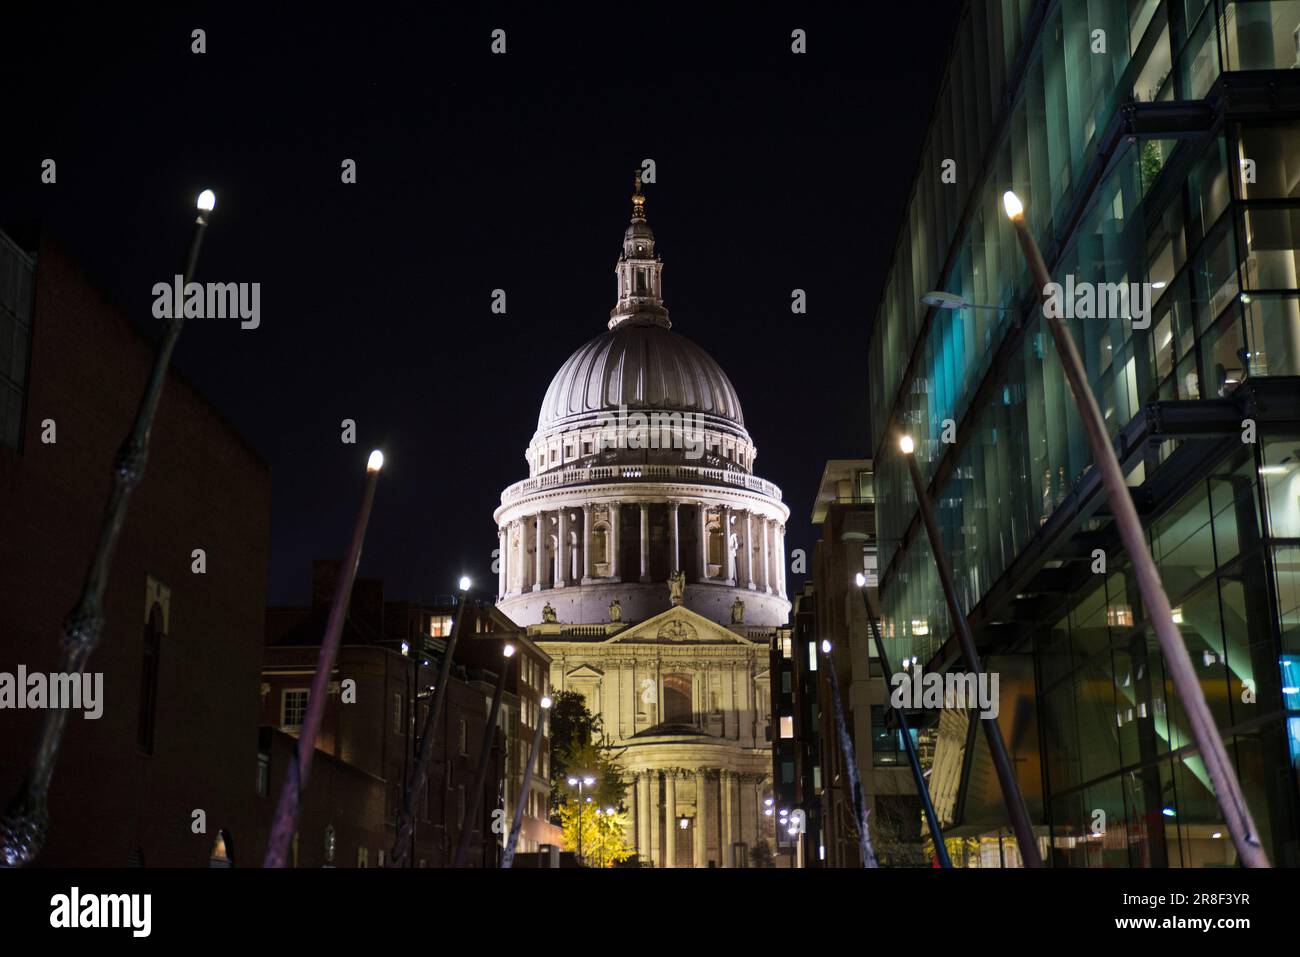 Wands from Harry Potter illuminating St Paul's cathedral at night Stock Photo